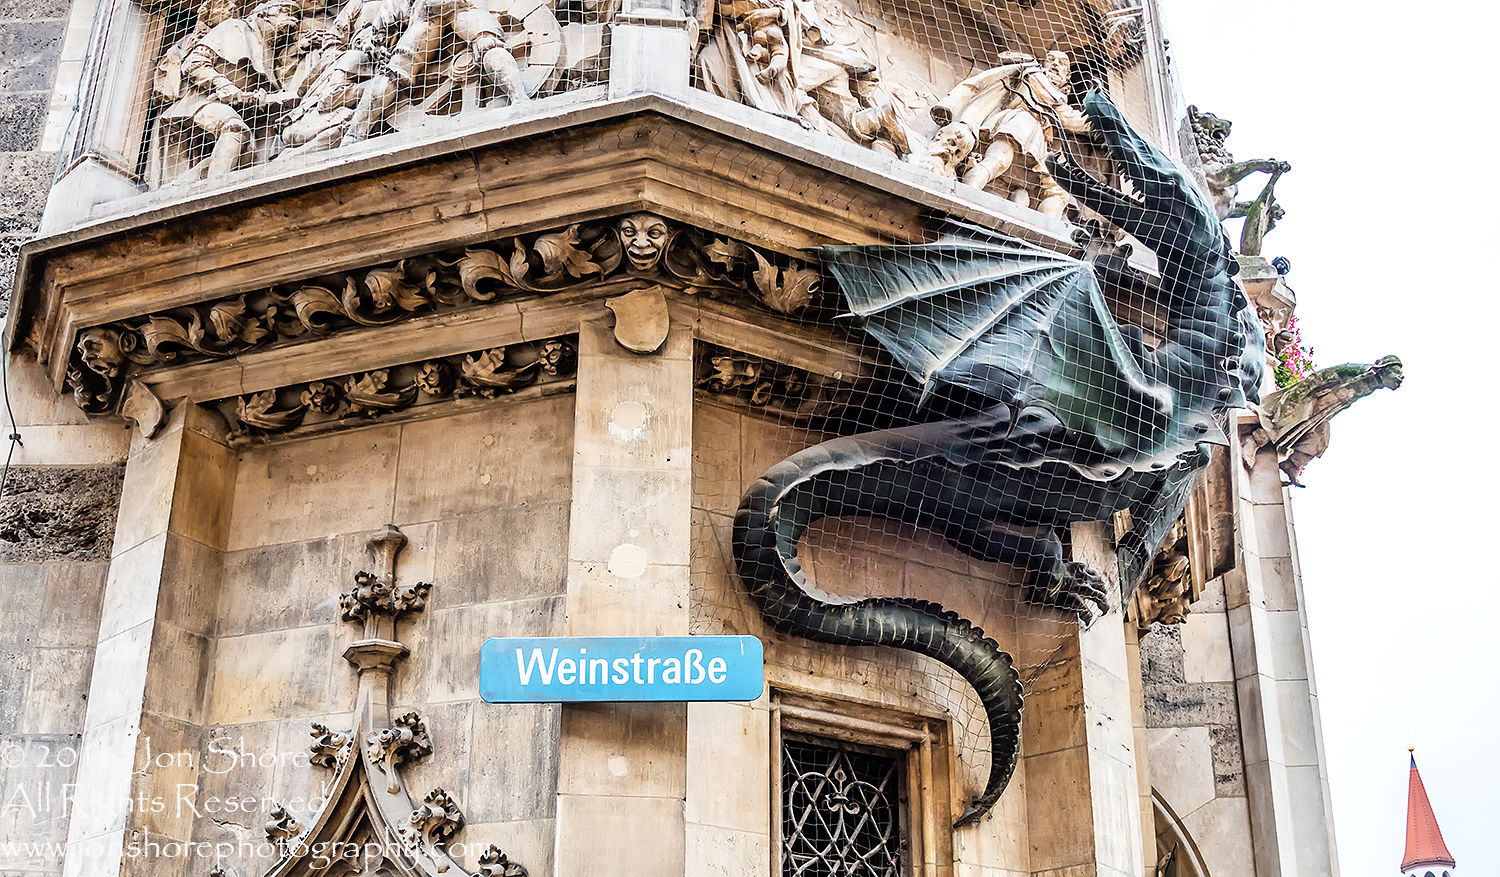 Netted Dragon on Munich City Hall. Nikkor 300mm